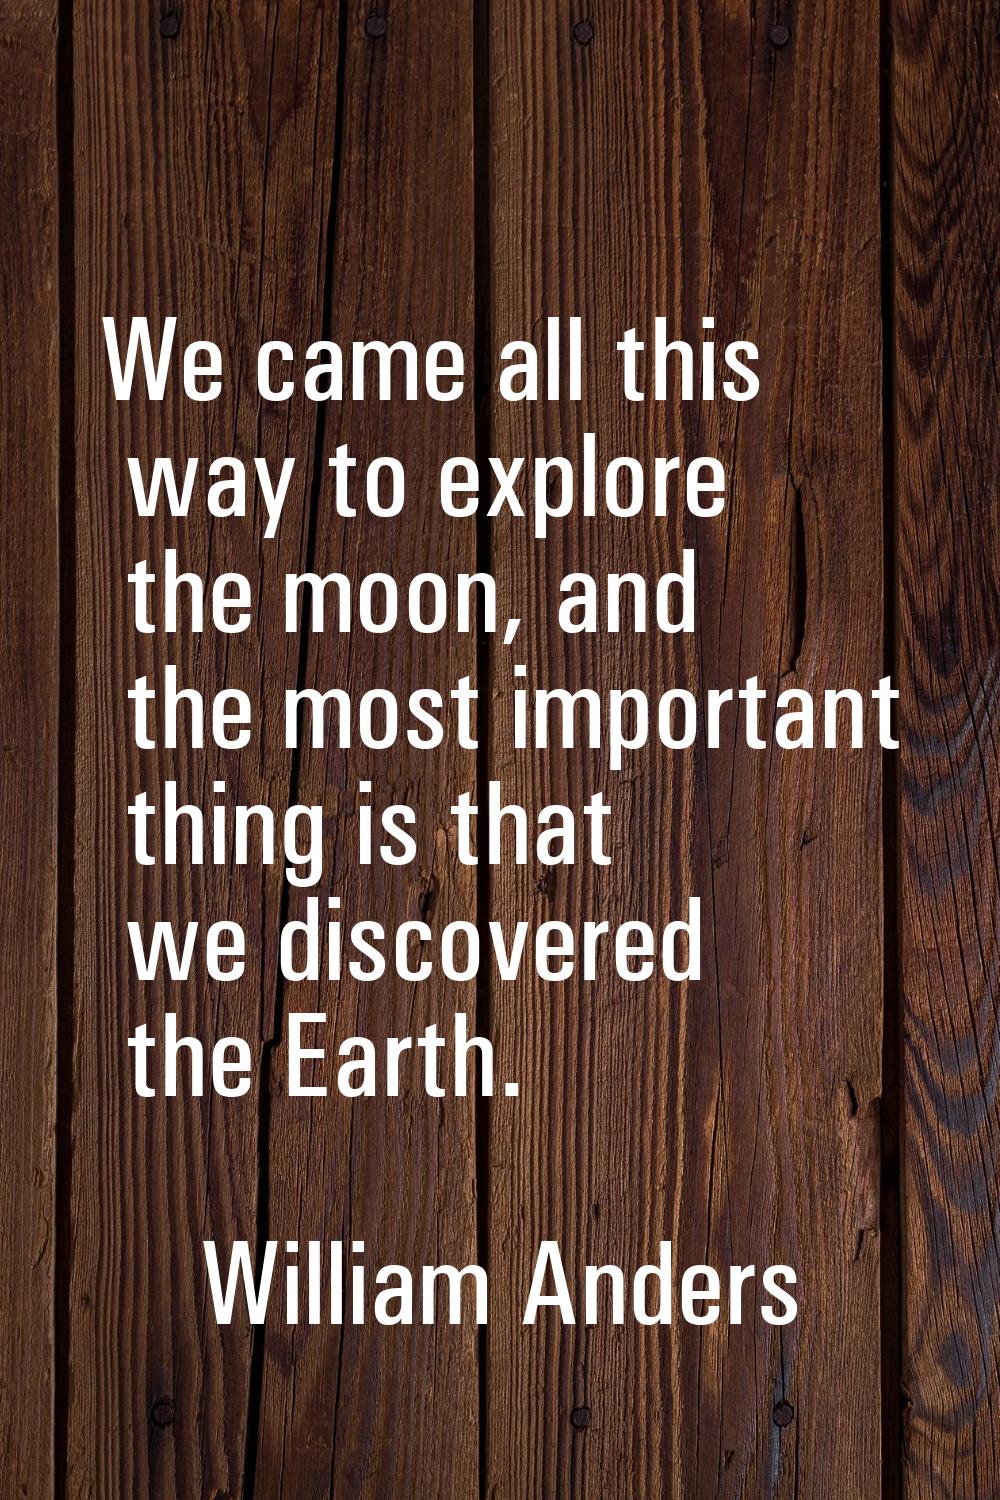 We came all this way to explore the moon, and the most important thing is that we discovered the Ea